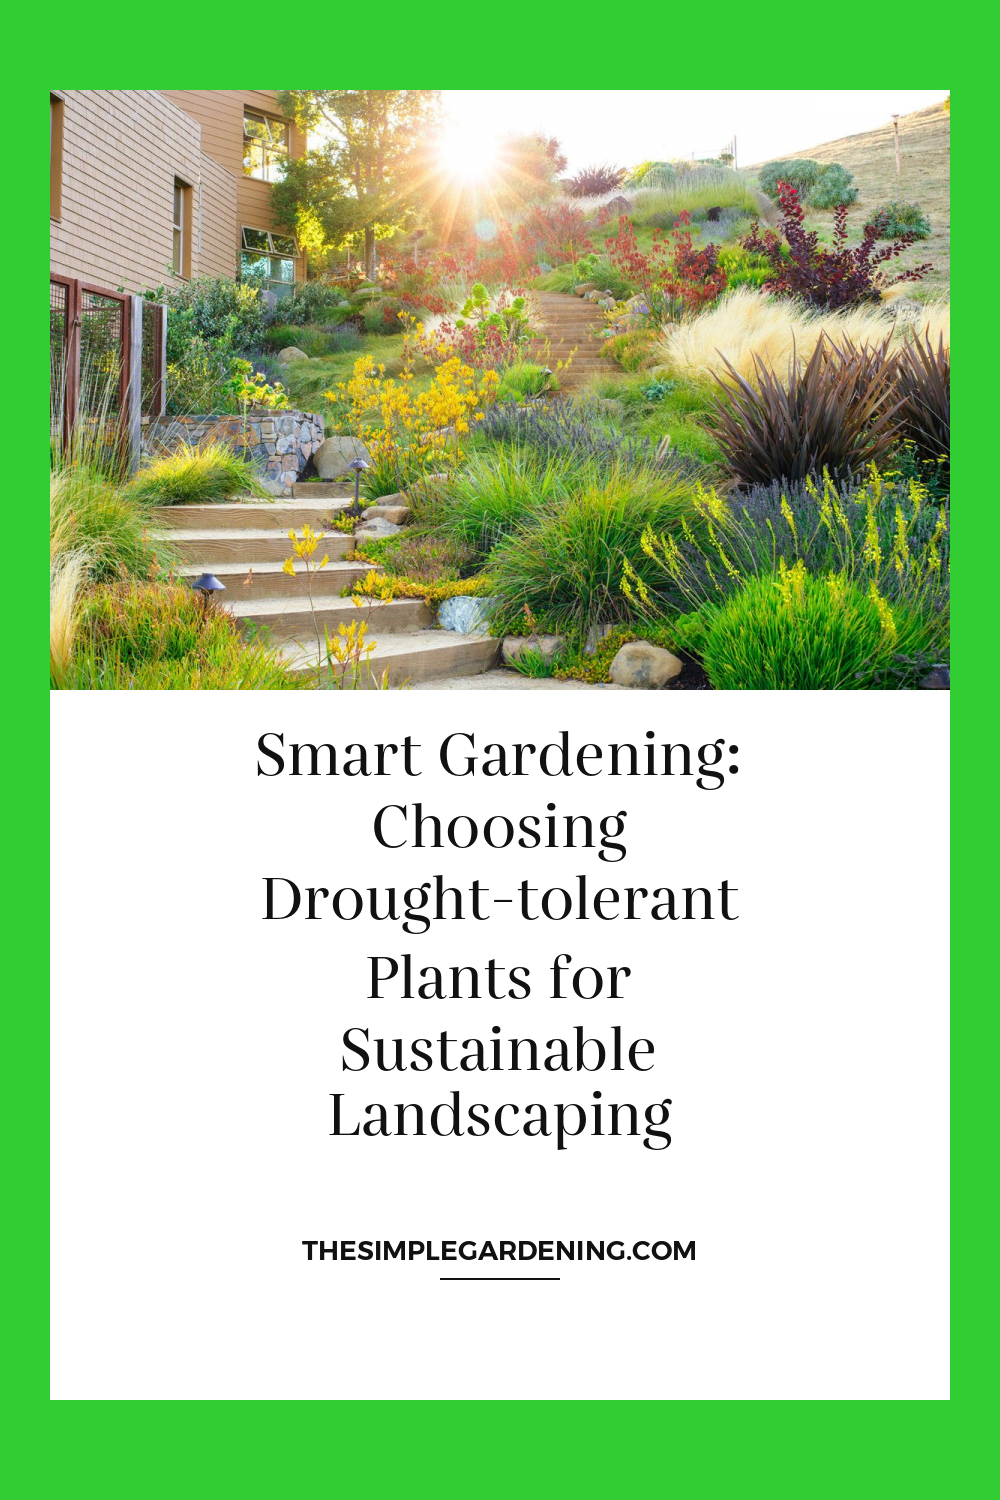 Smart Gardening: Choosing Drought-tolerant Plants for Sustainable Landscaping